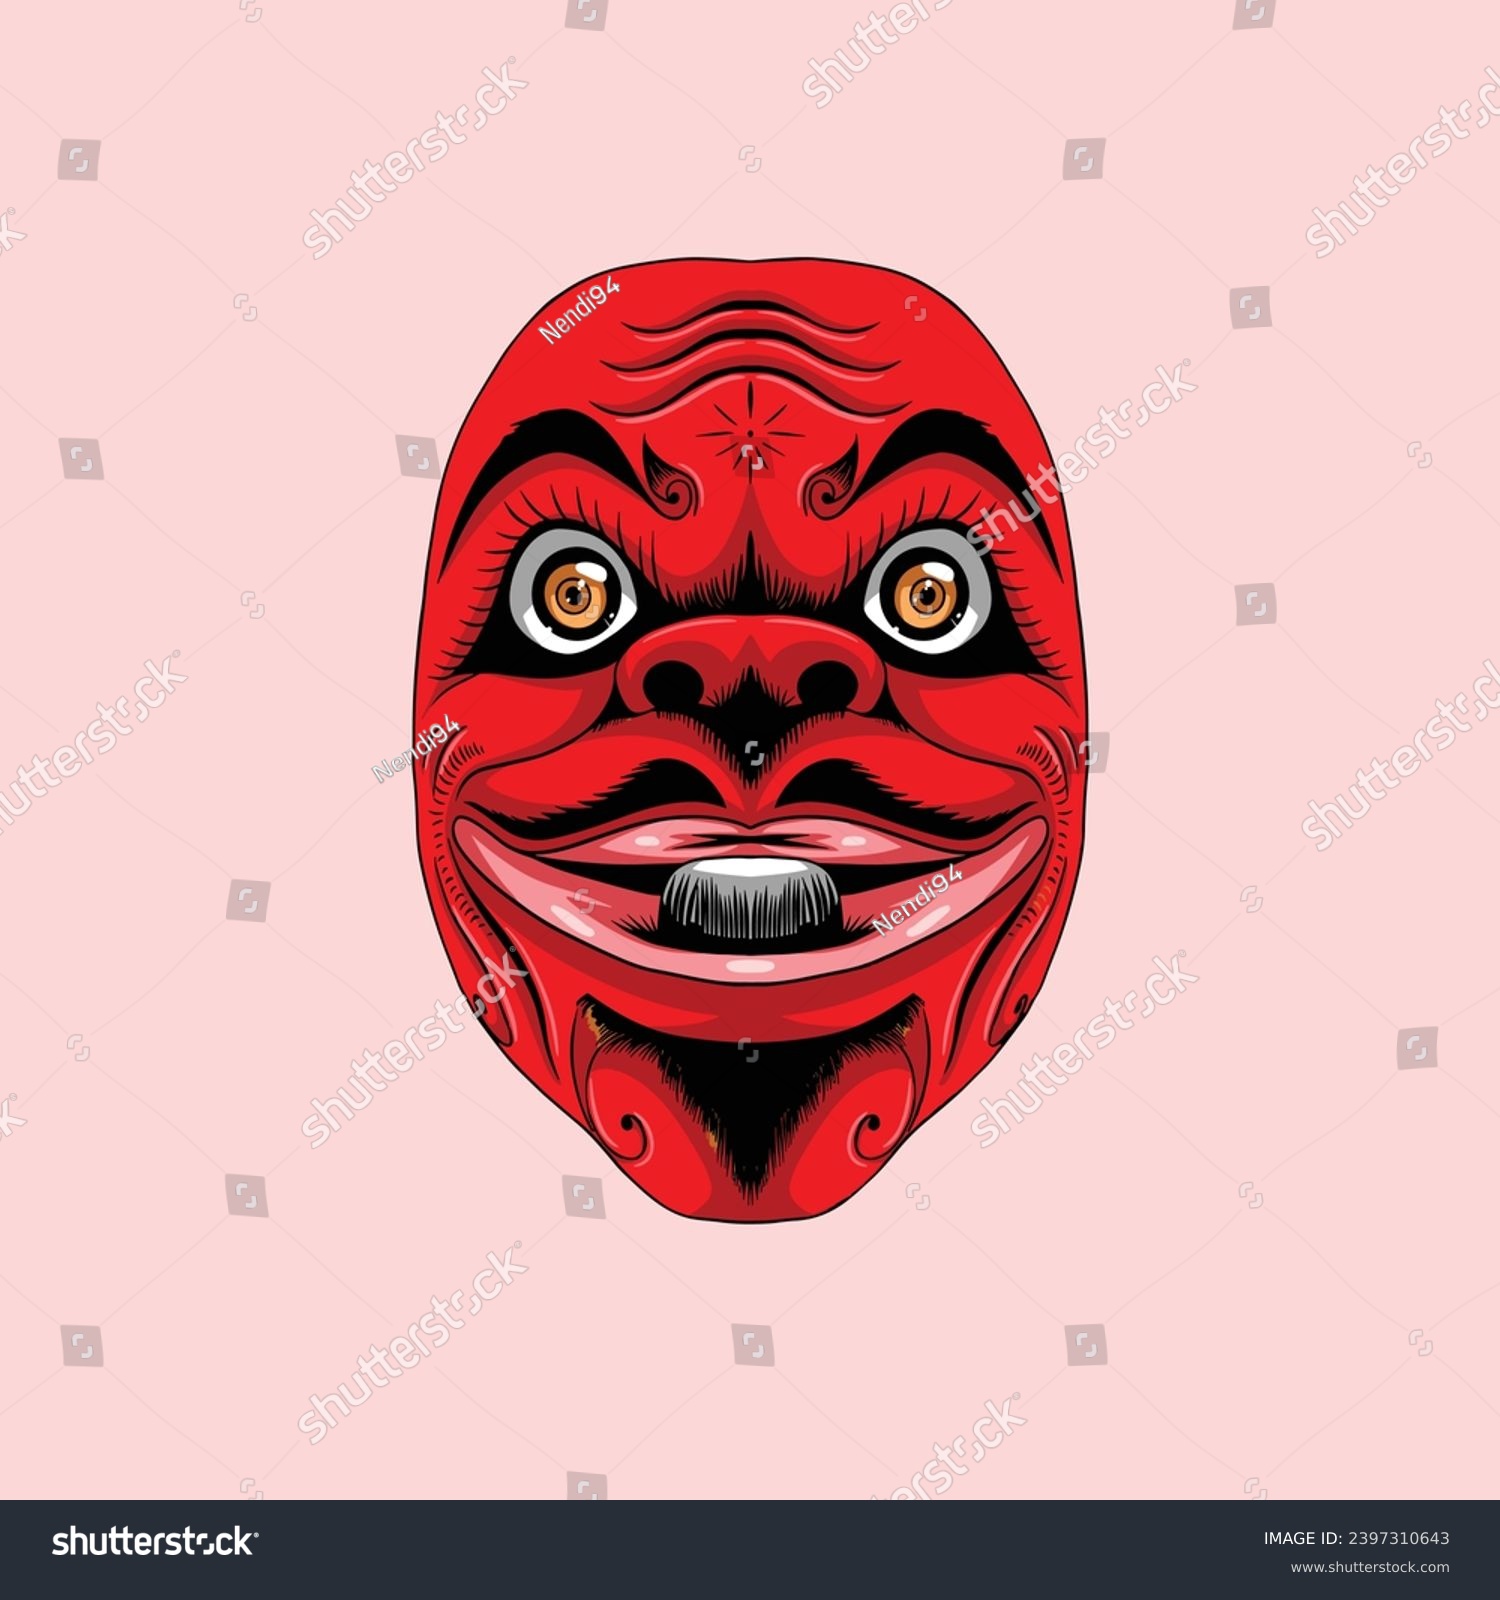 SVG of Cepot mask, one of the original wayang golek characters from West Java, Indonesia svg